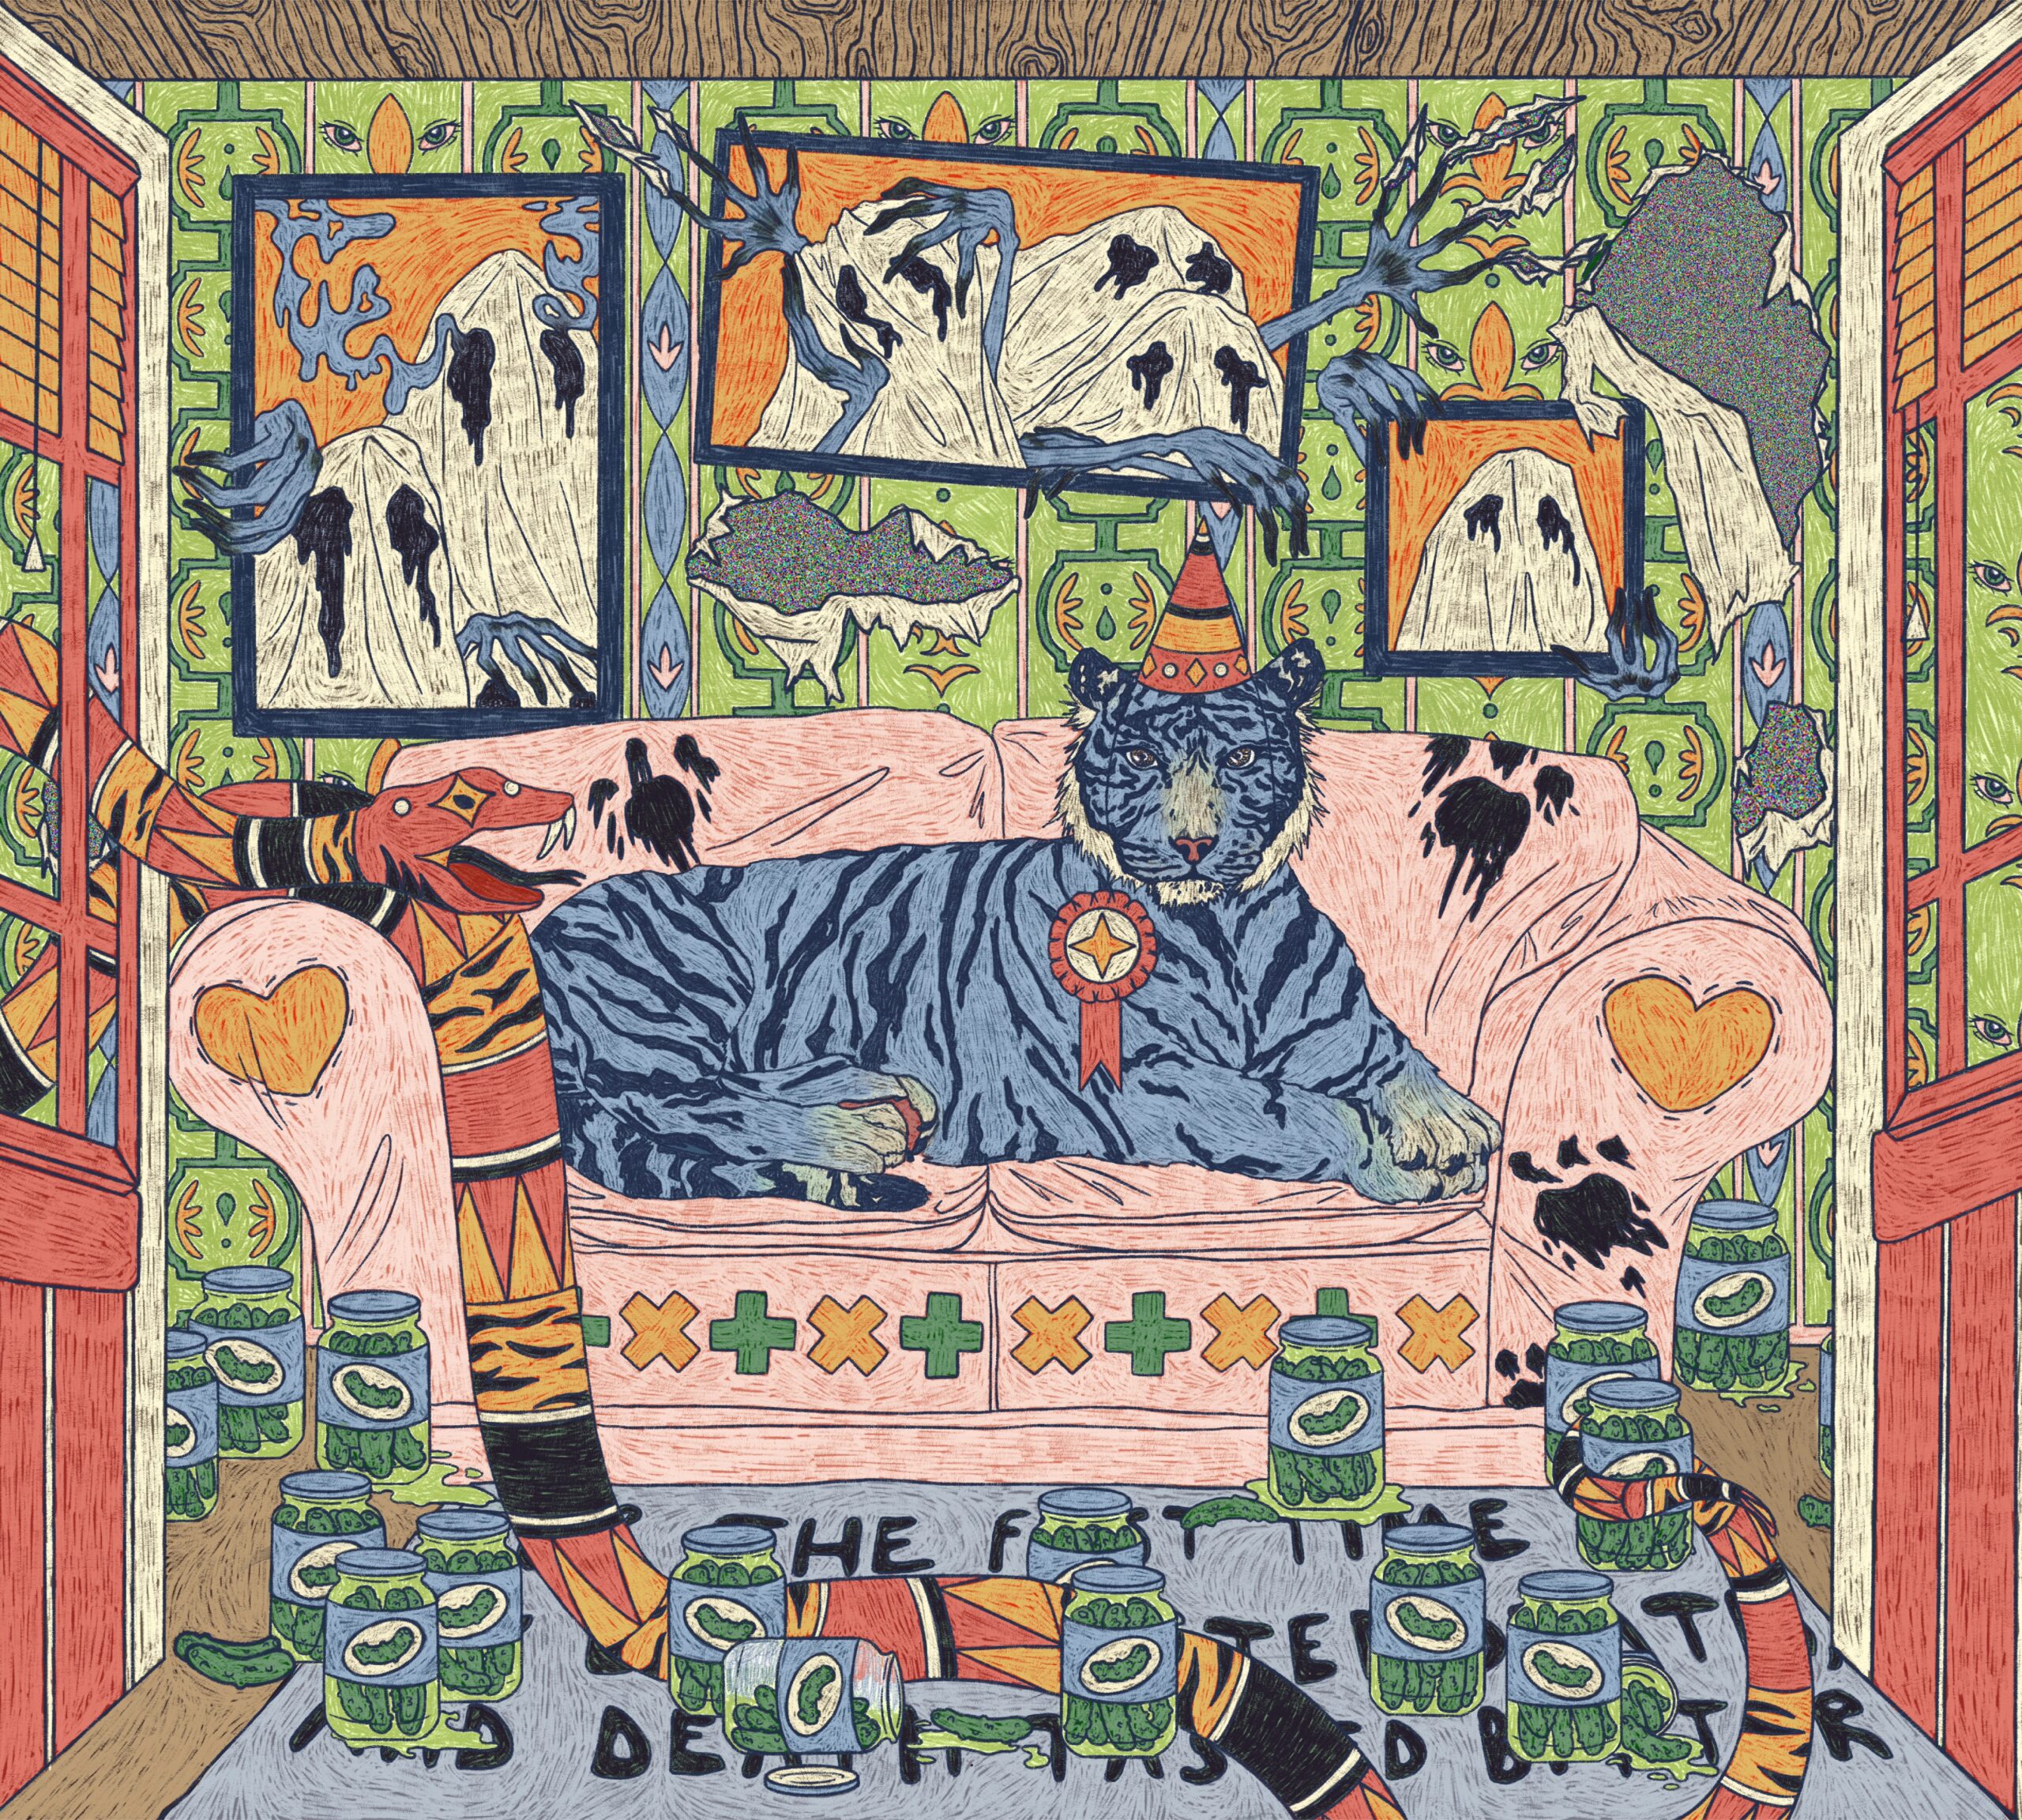 We see a blue tiger sitting regally on a pink shabby sofa. A snake patterned with red, orange, and black is seen entering through a window and baring its fangs towards the tiger, who is sporting an award ribbon on his furry chest. Photos of ghosts hang on torn green patterned wallpaper walls. The floor is strewn with pickle jars spilling their contents everywhere and obscuring a message written on the floor in black balloon font.